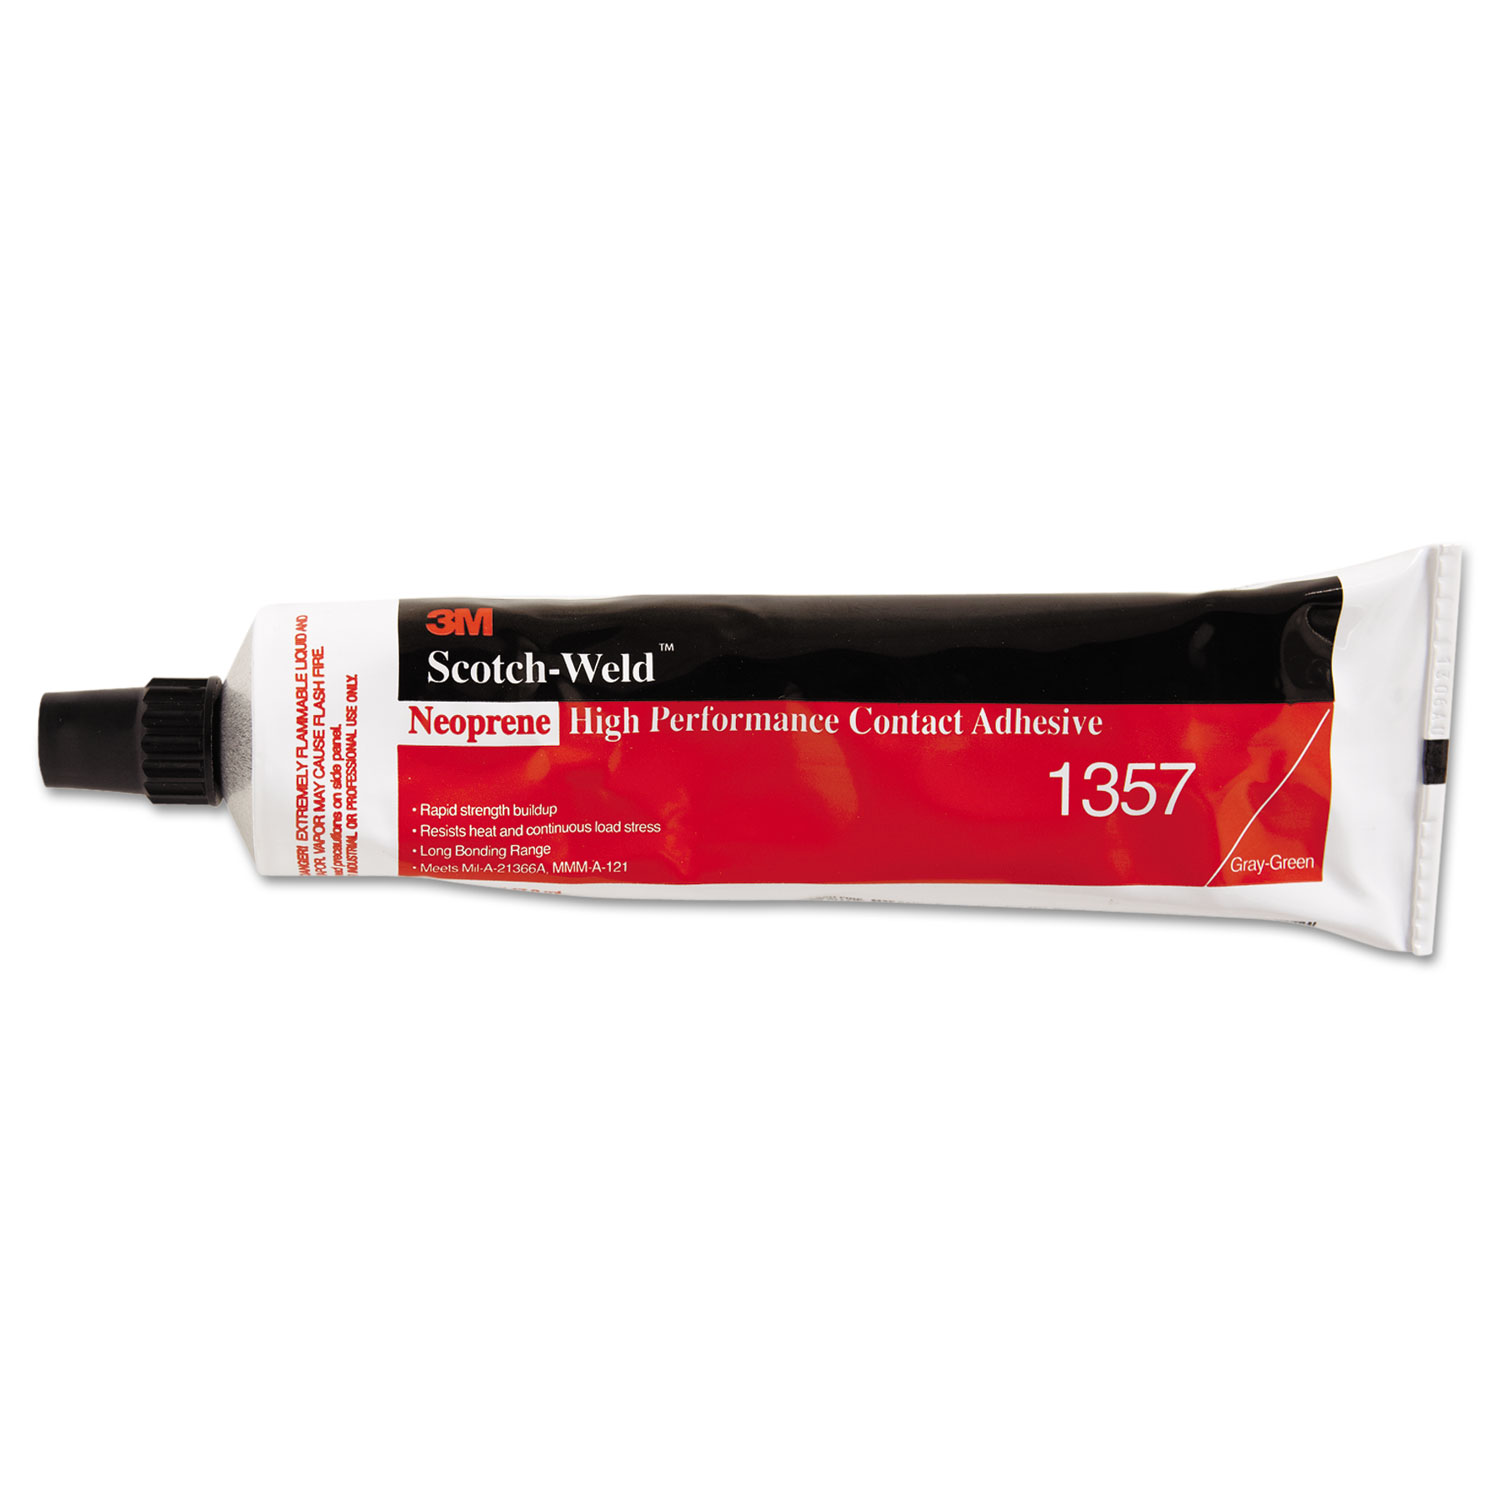 1357 Scotch-Grip High-Performance Contact Adhesive